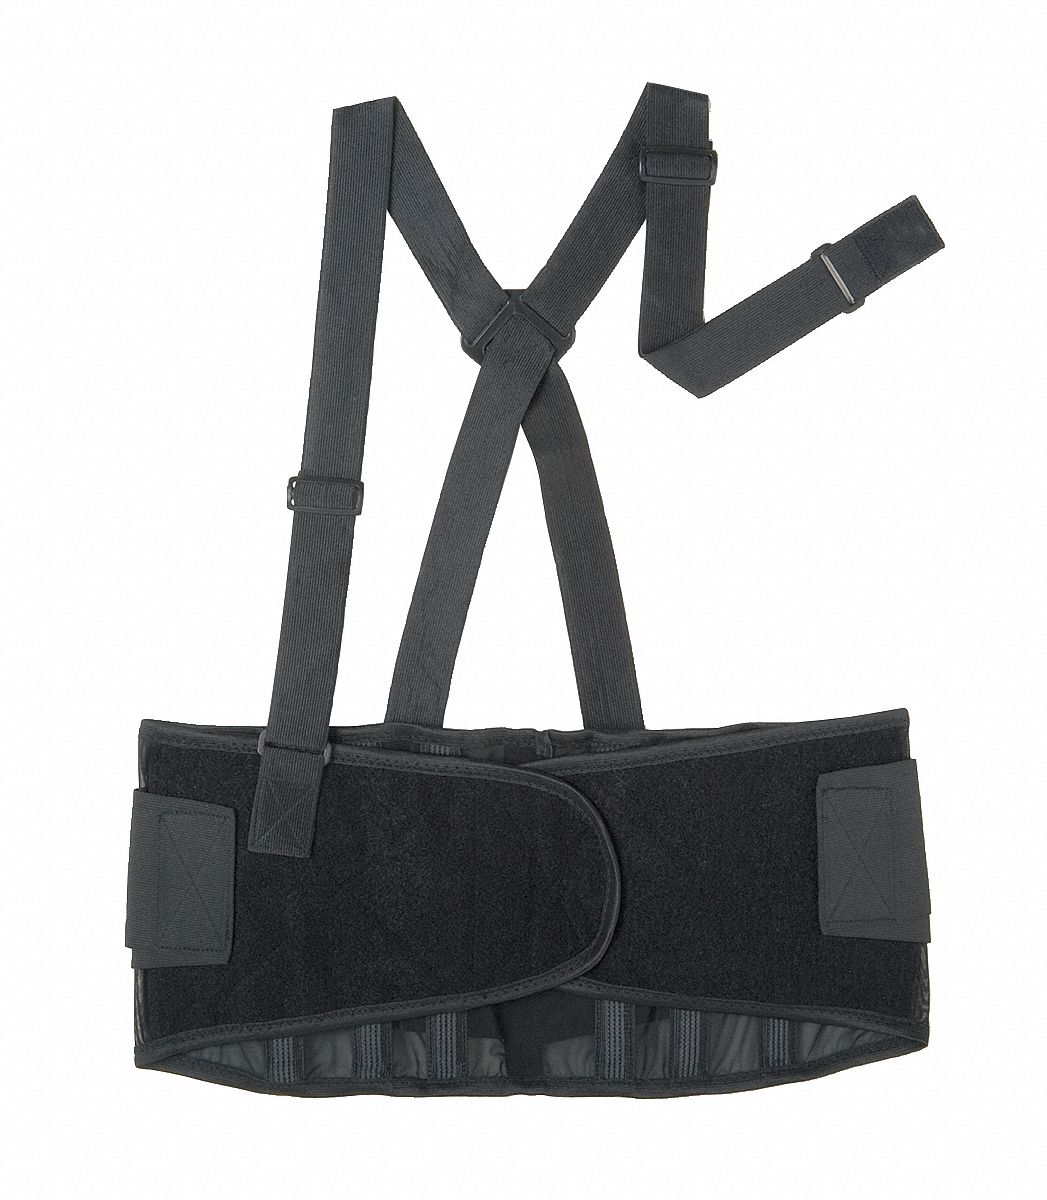 CONDOR, L Back Support Size, 9 in Wd, Back Support - 3RVC7|3RVC7 - Grainger